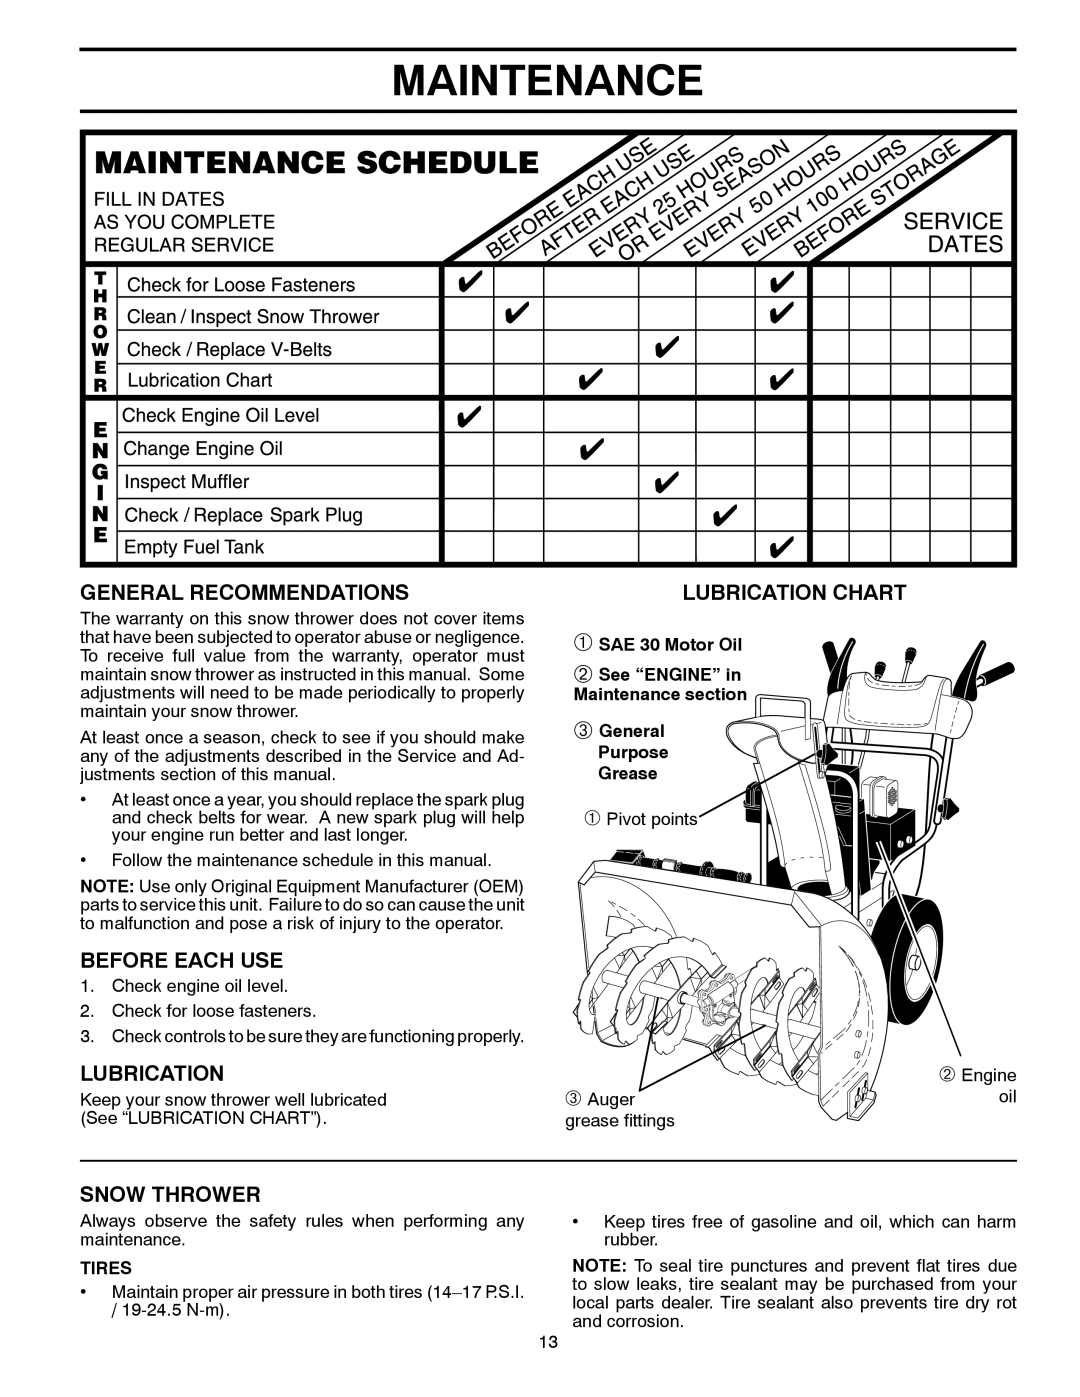 Poulan 96198002601 Maintenance, General Recommendations, Before Each Use, Snow Thrower, Lubrication Chart, Tires 